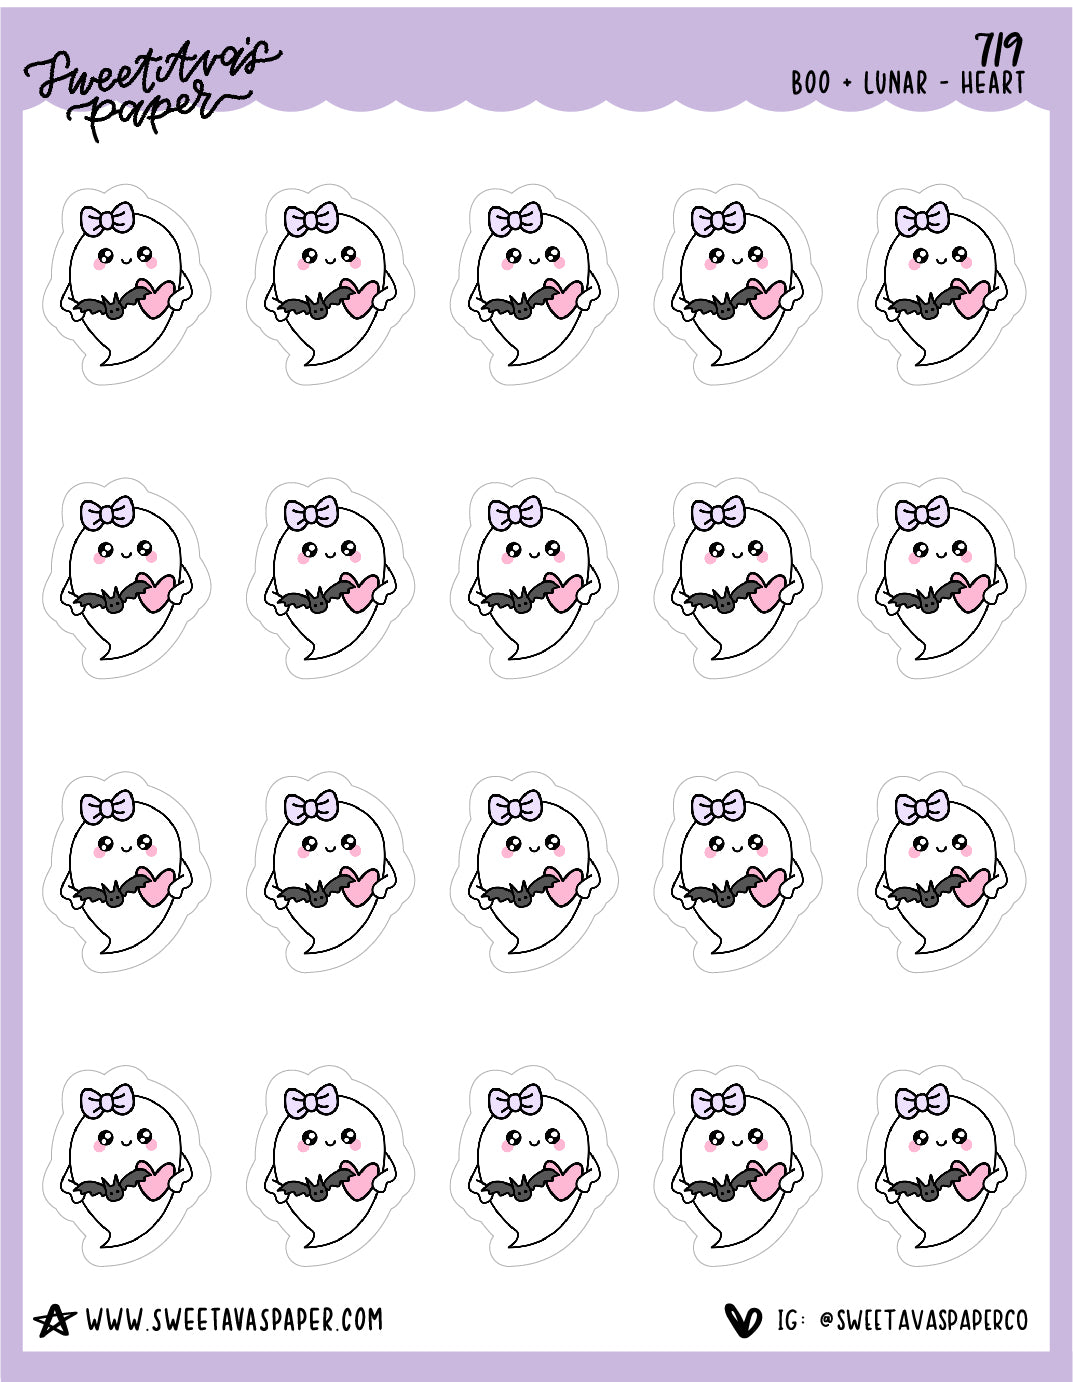 Heart Planner Stickers - Boo and Lunar [719]